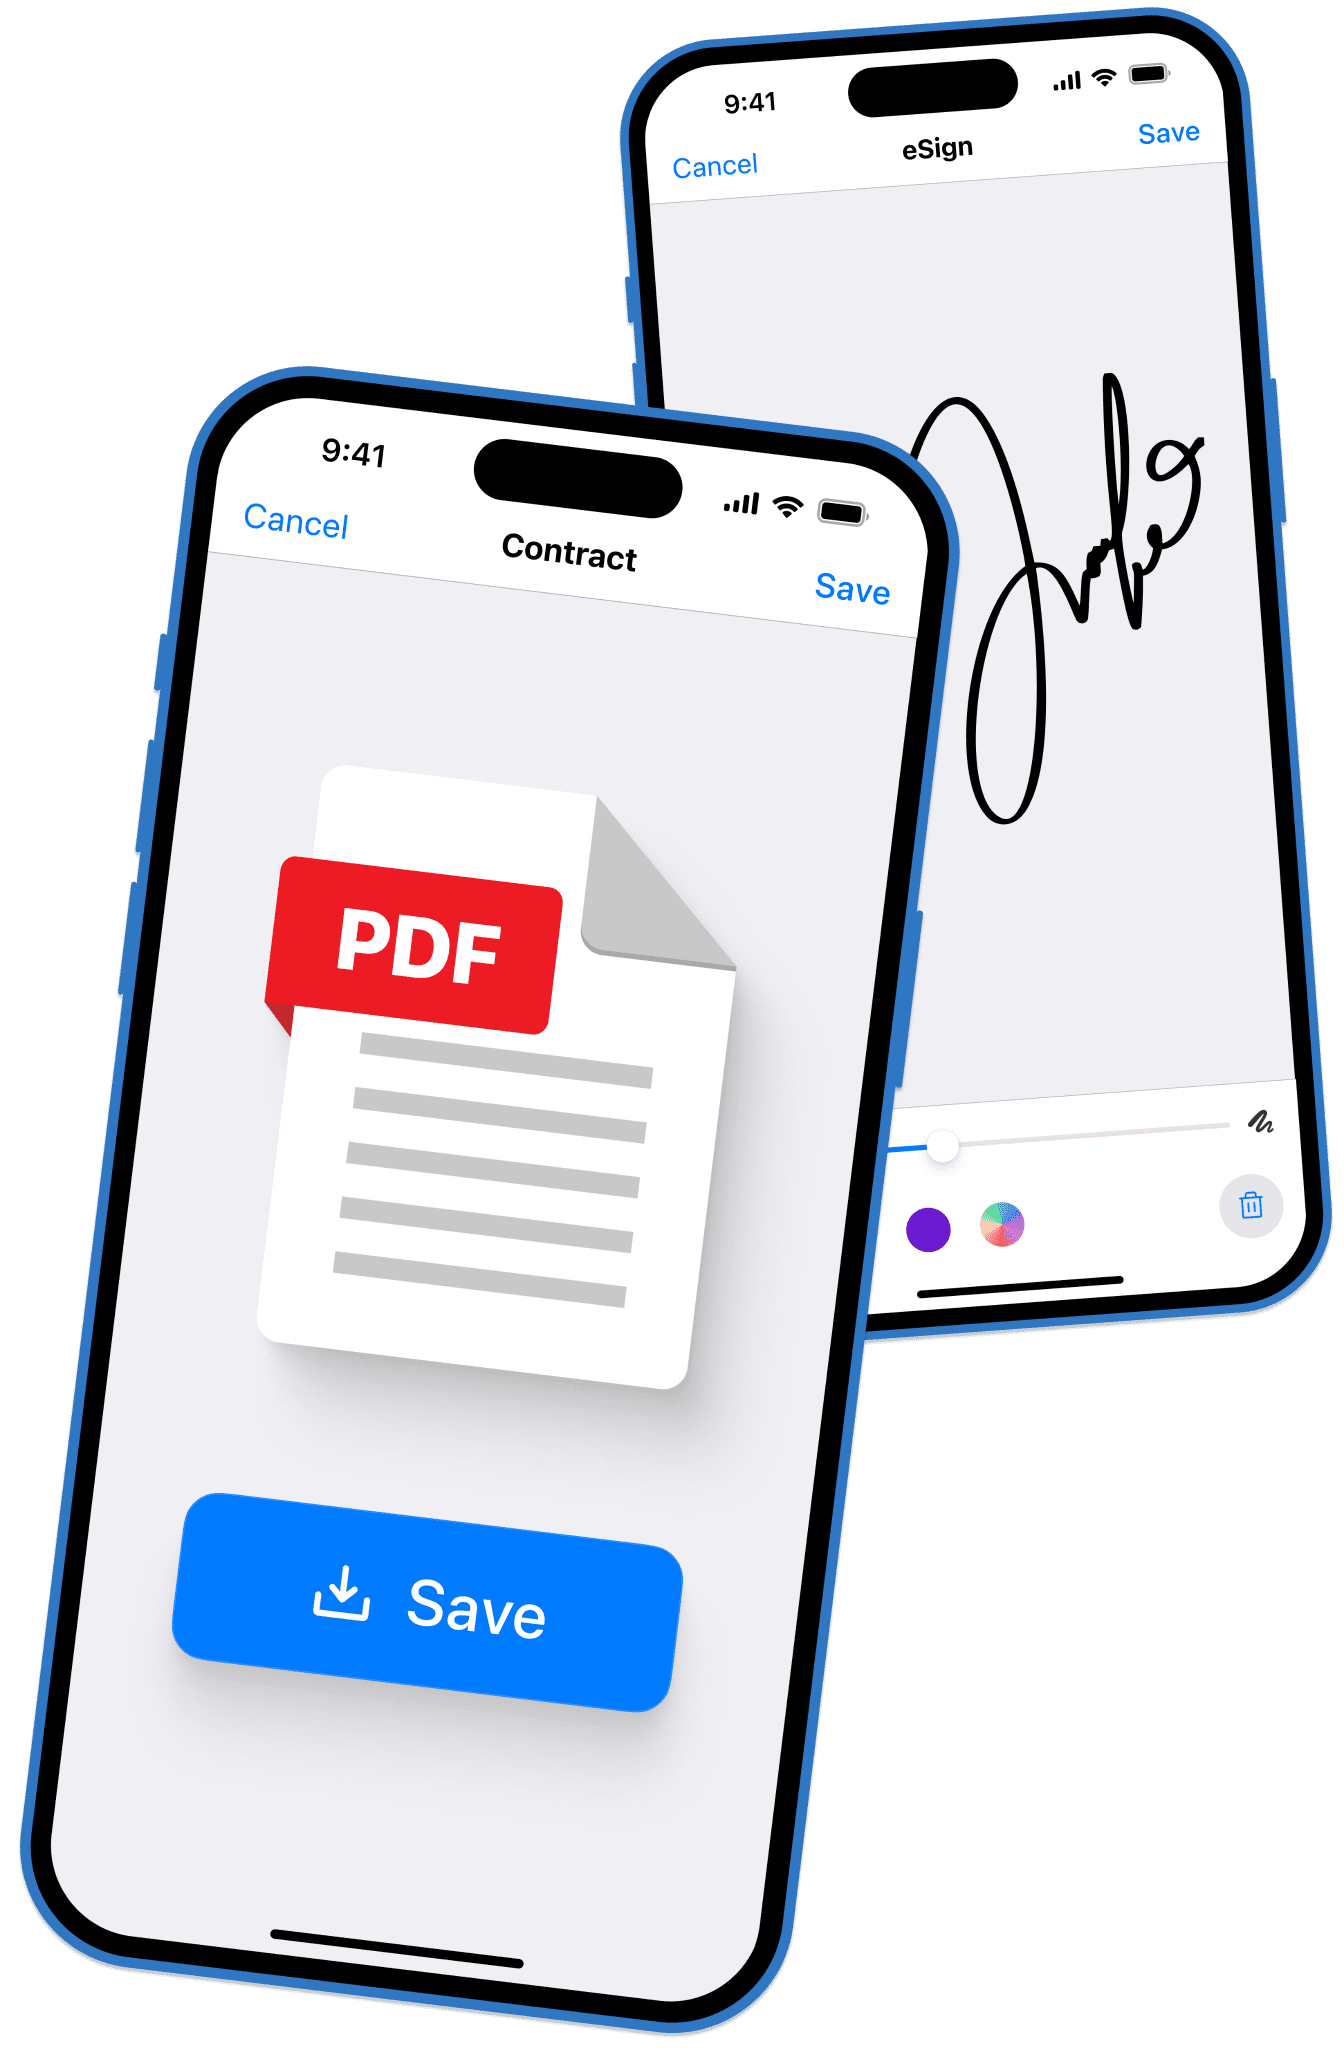 scanner app iphone mockups showing png export and esign features